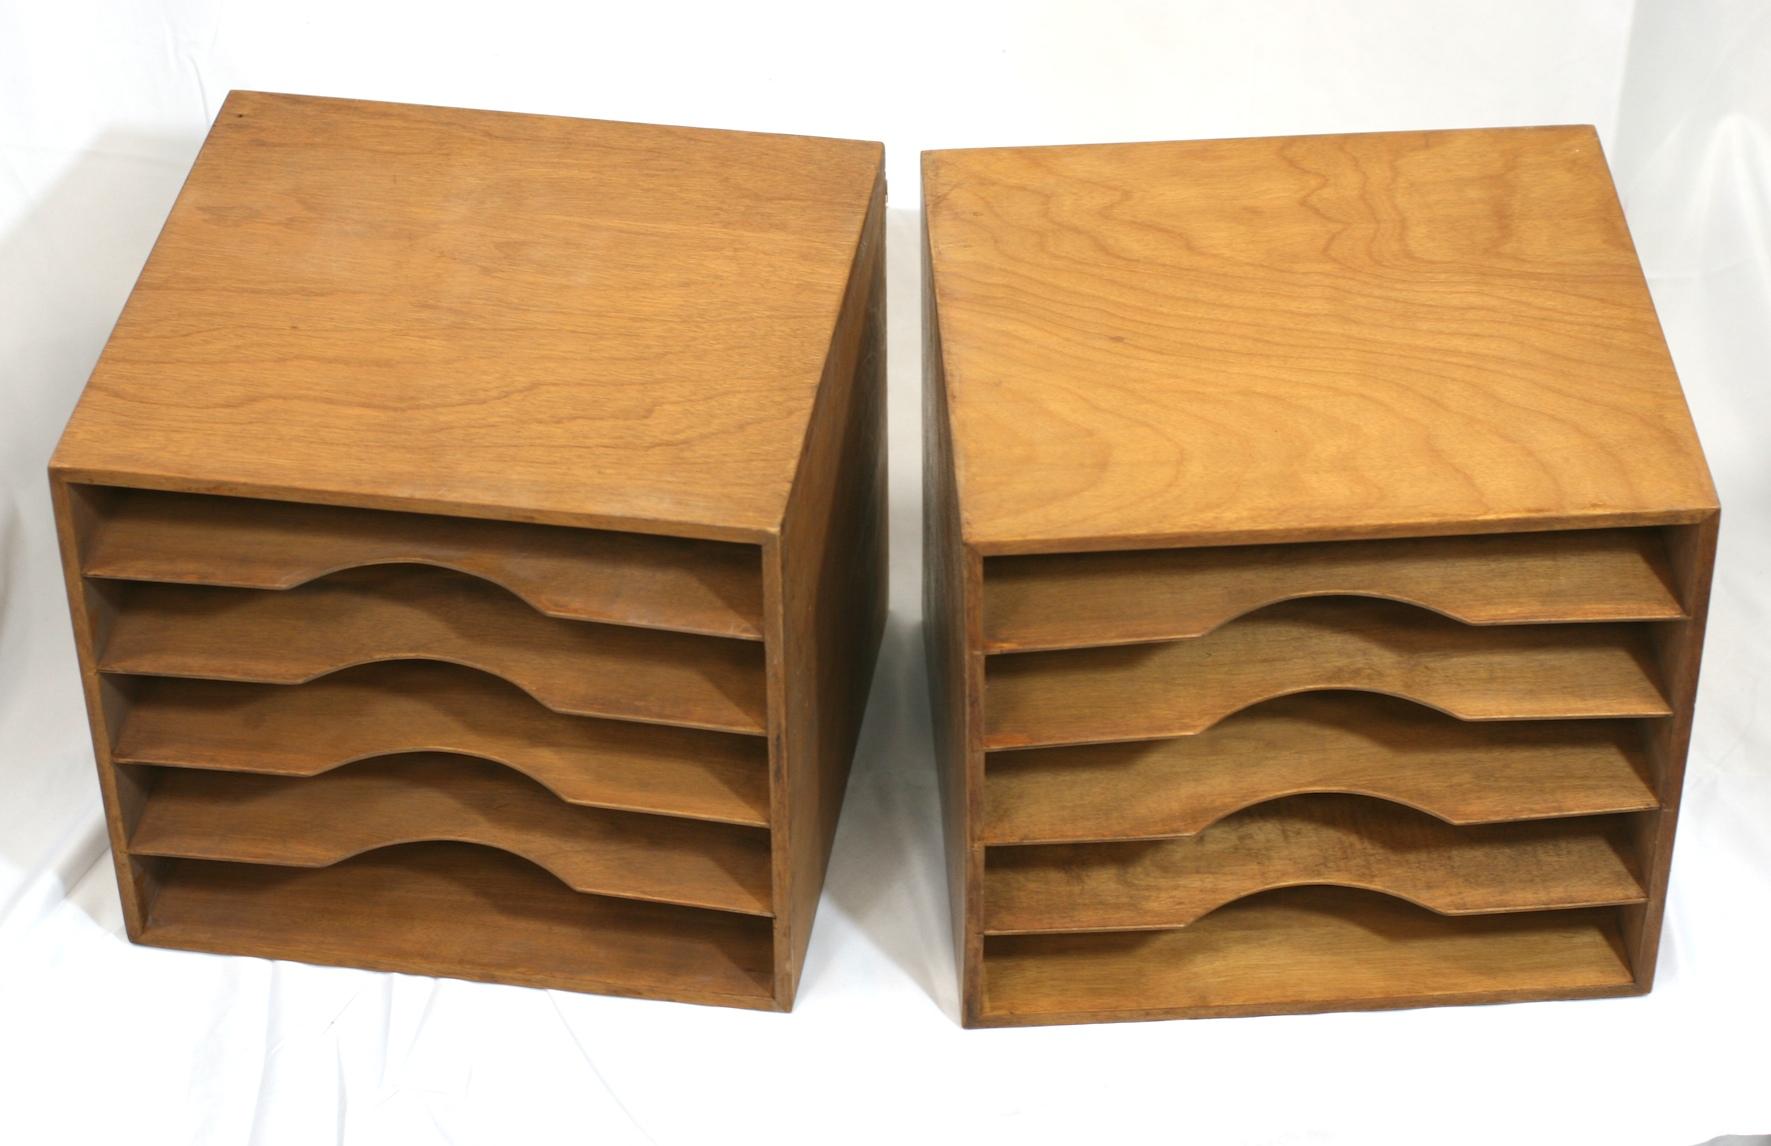 Pair of Art Deco table top wood filing boxes for papers or mail. Great for Industrial style interiors. They measure 14